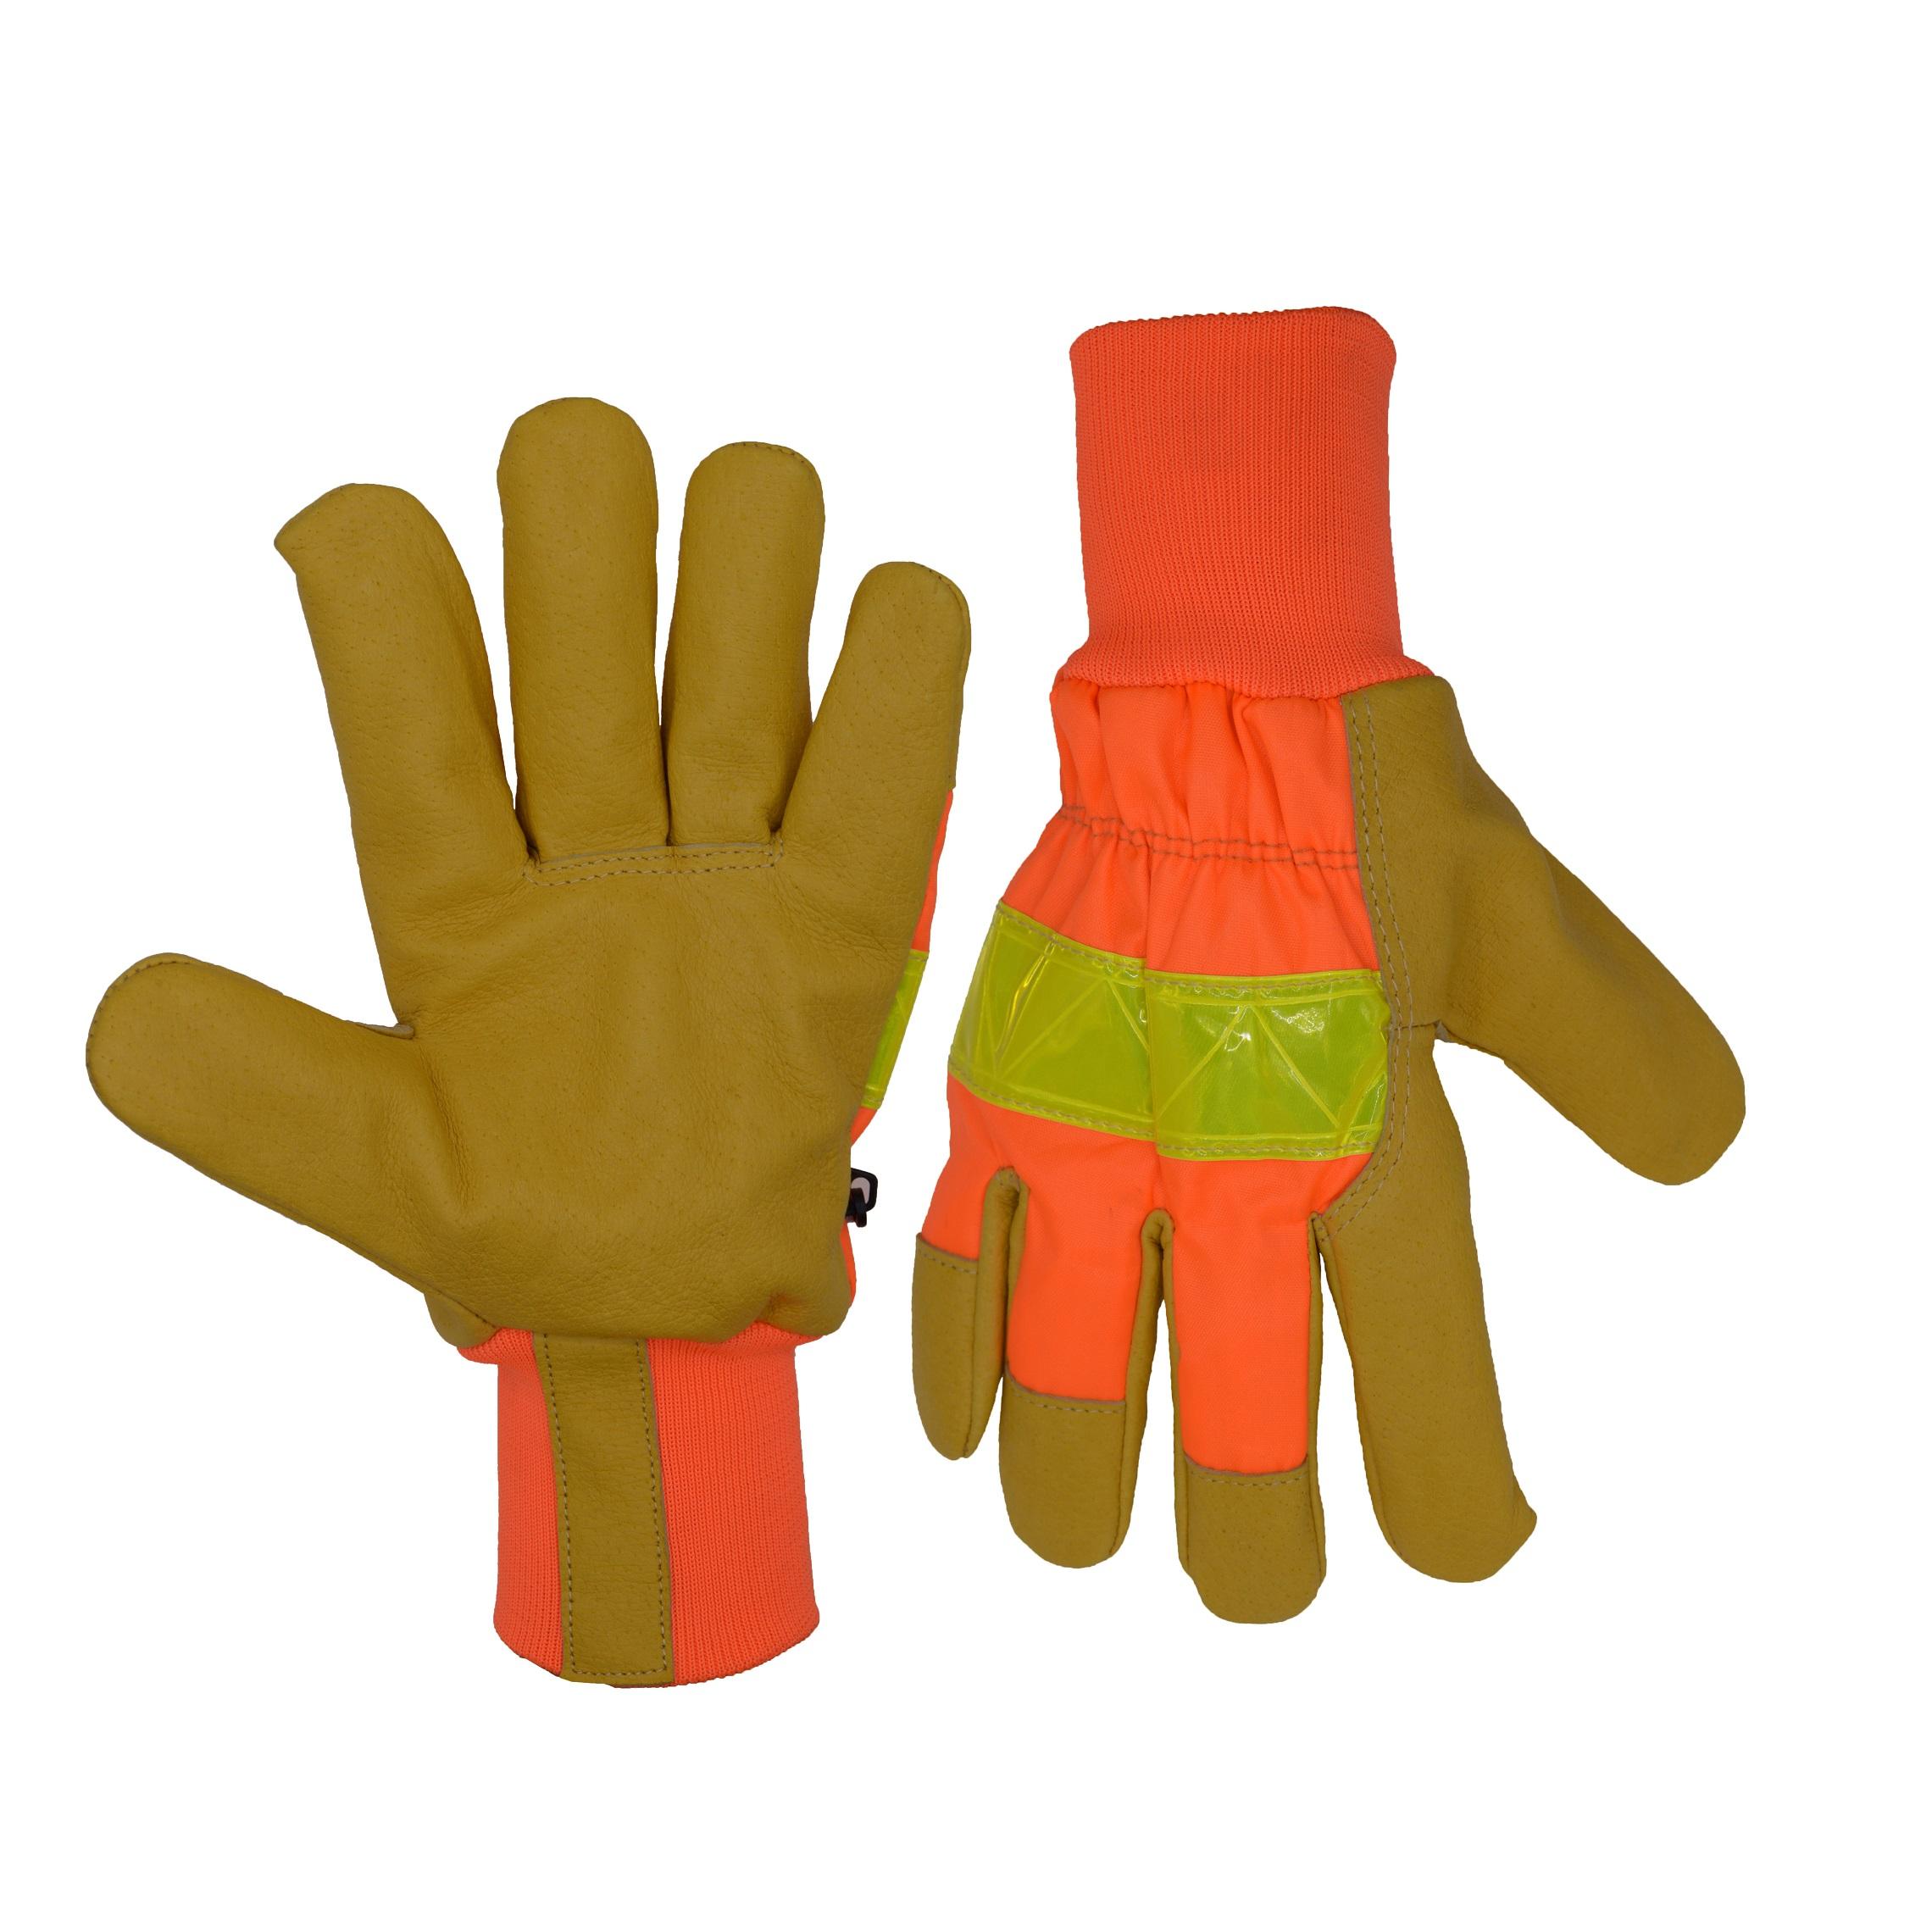 1215 PRISAFETY Prisafety High visual Orange Winter Leather Work Driver Pig Skin Reflective Gloves with Knitted Wrist Cuff